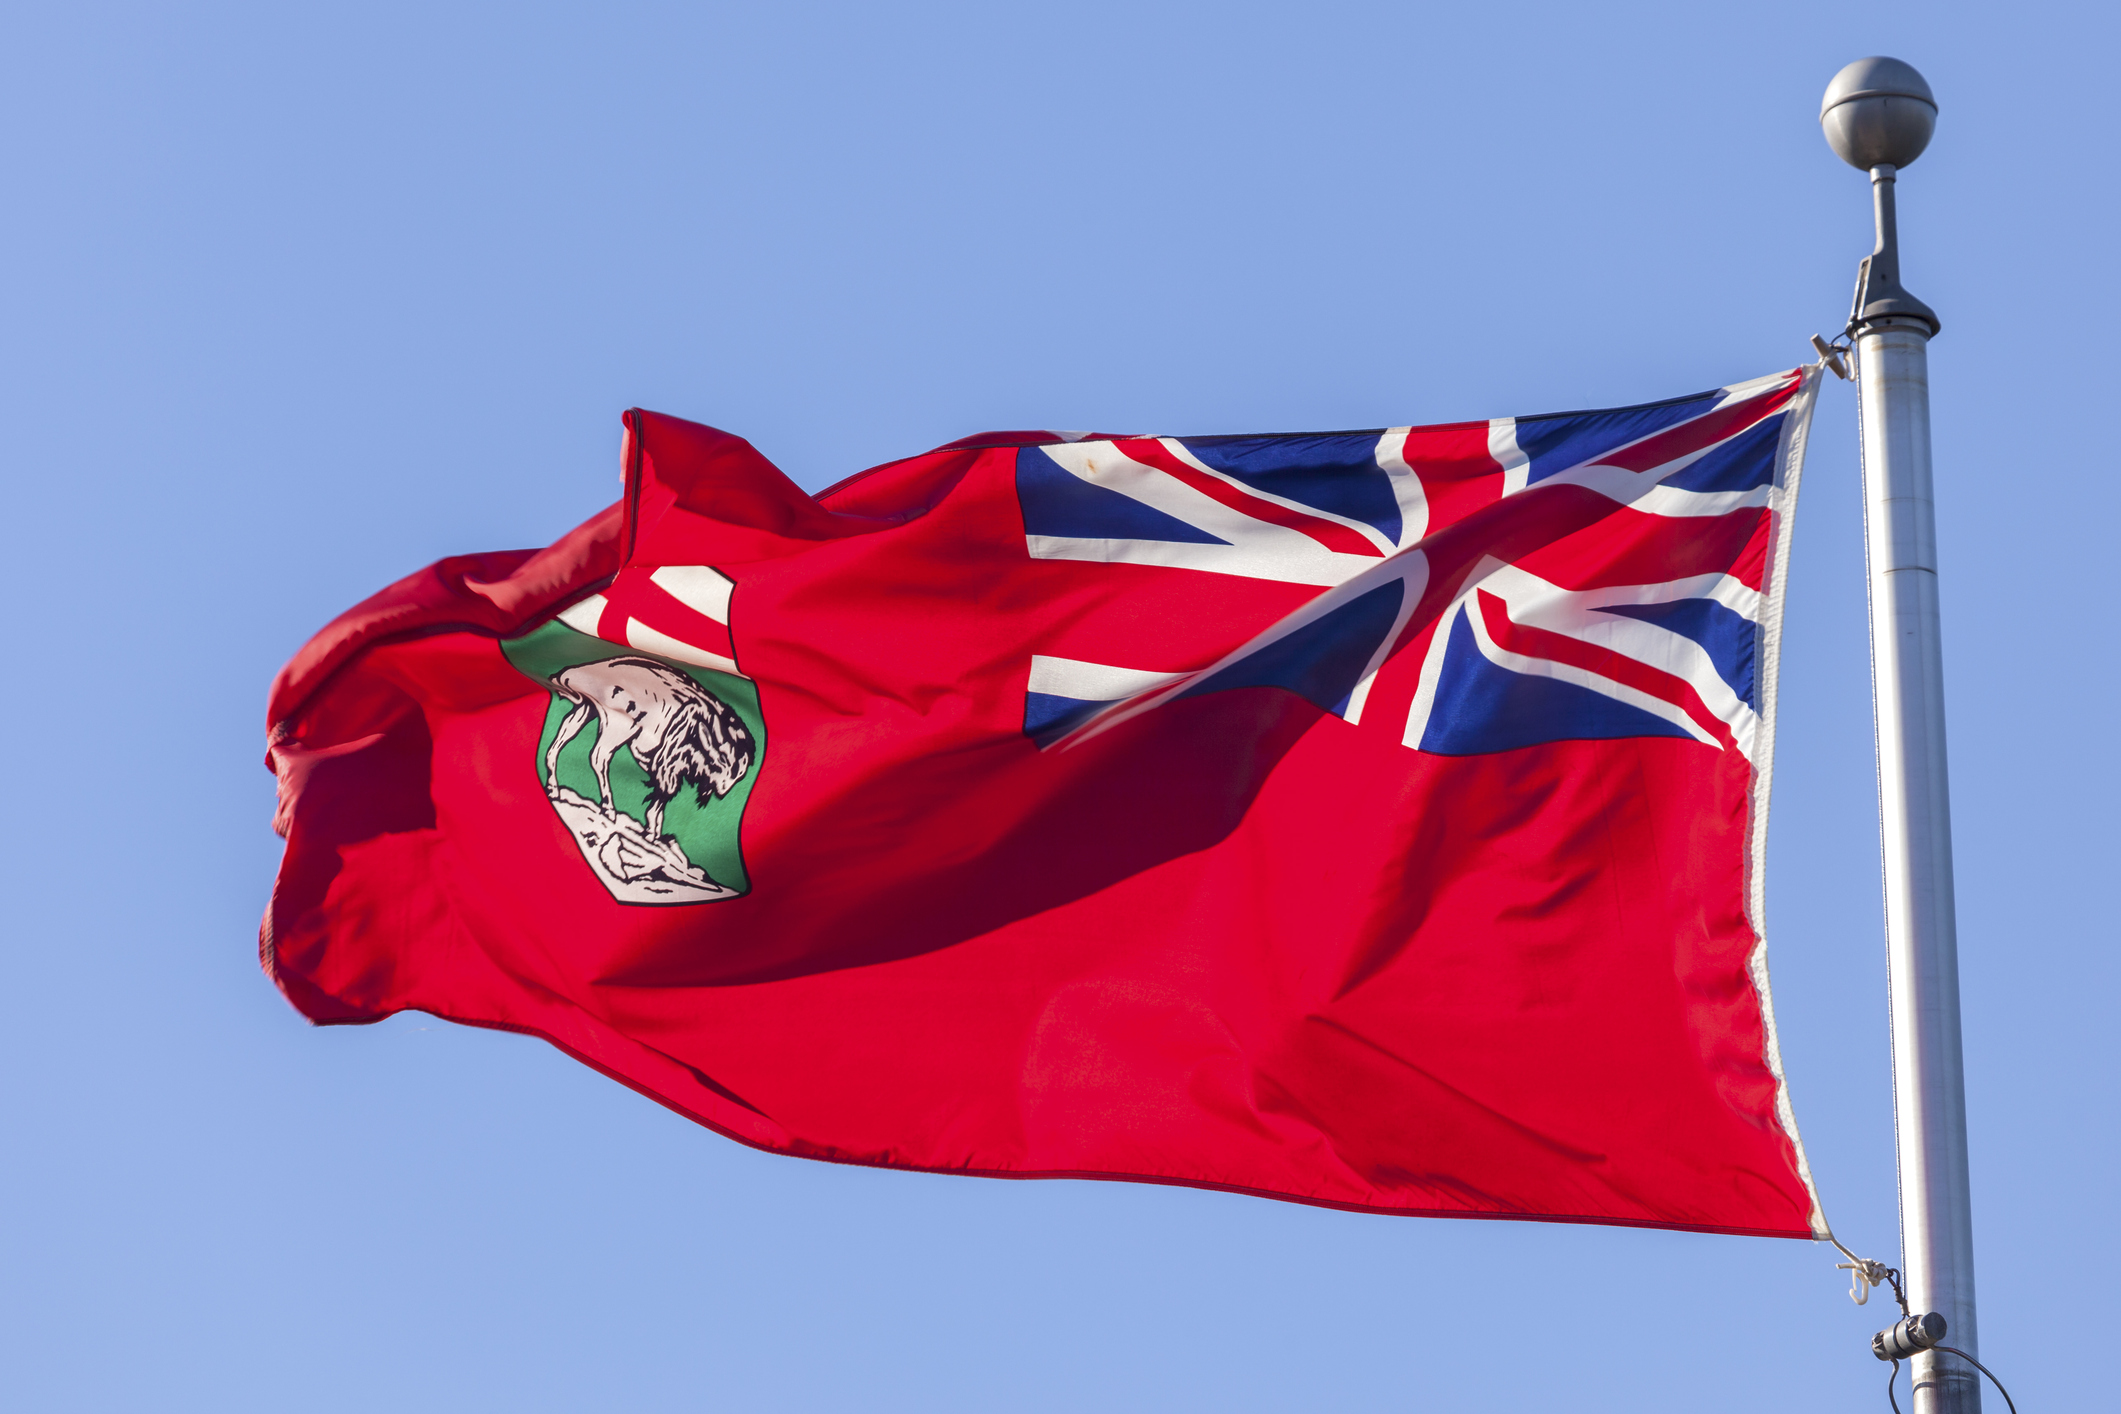 Manitoba Provincial Nominee Program (MPNP) issues invitations to apply for a provincial nomination to skilled workersin Manitoba and overseas.